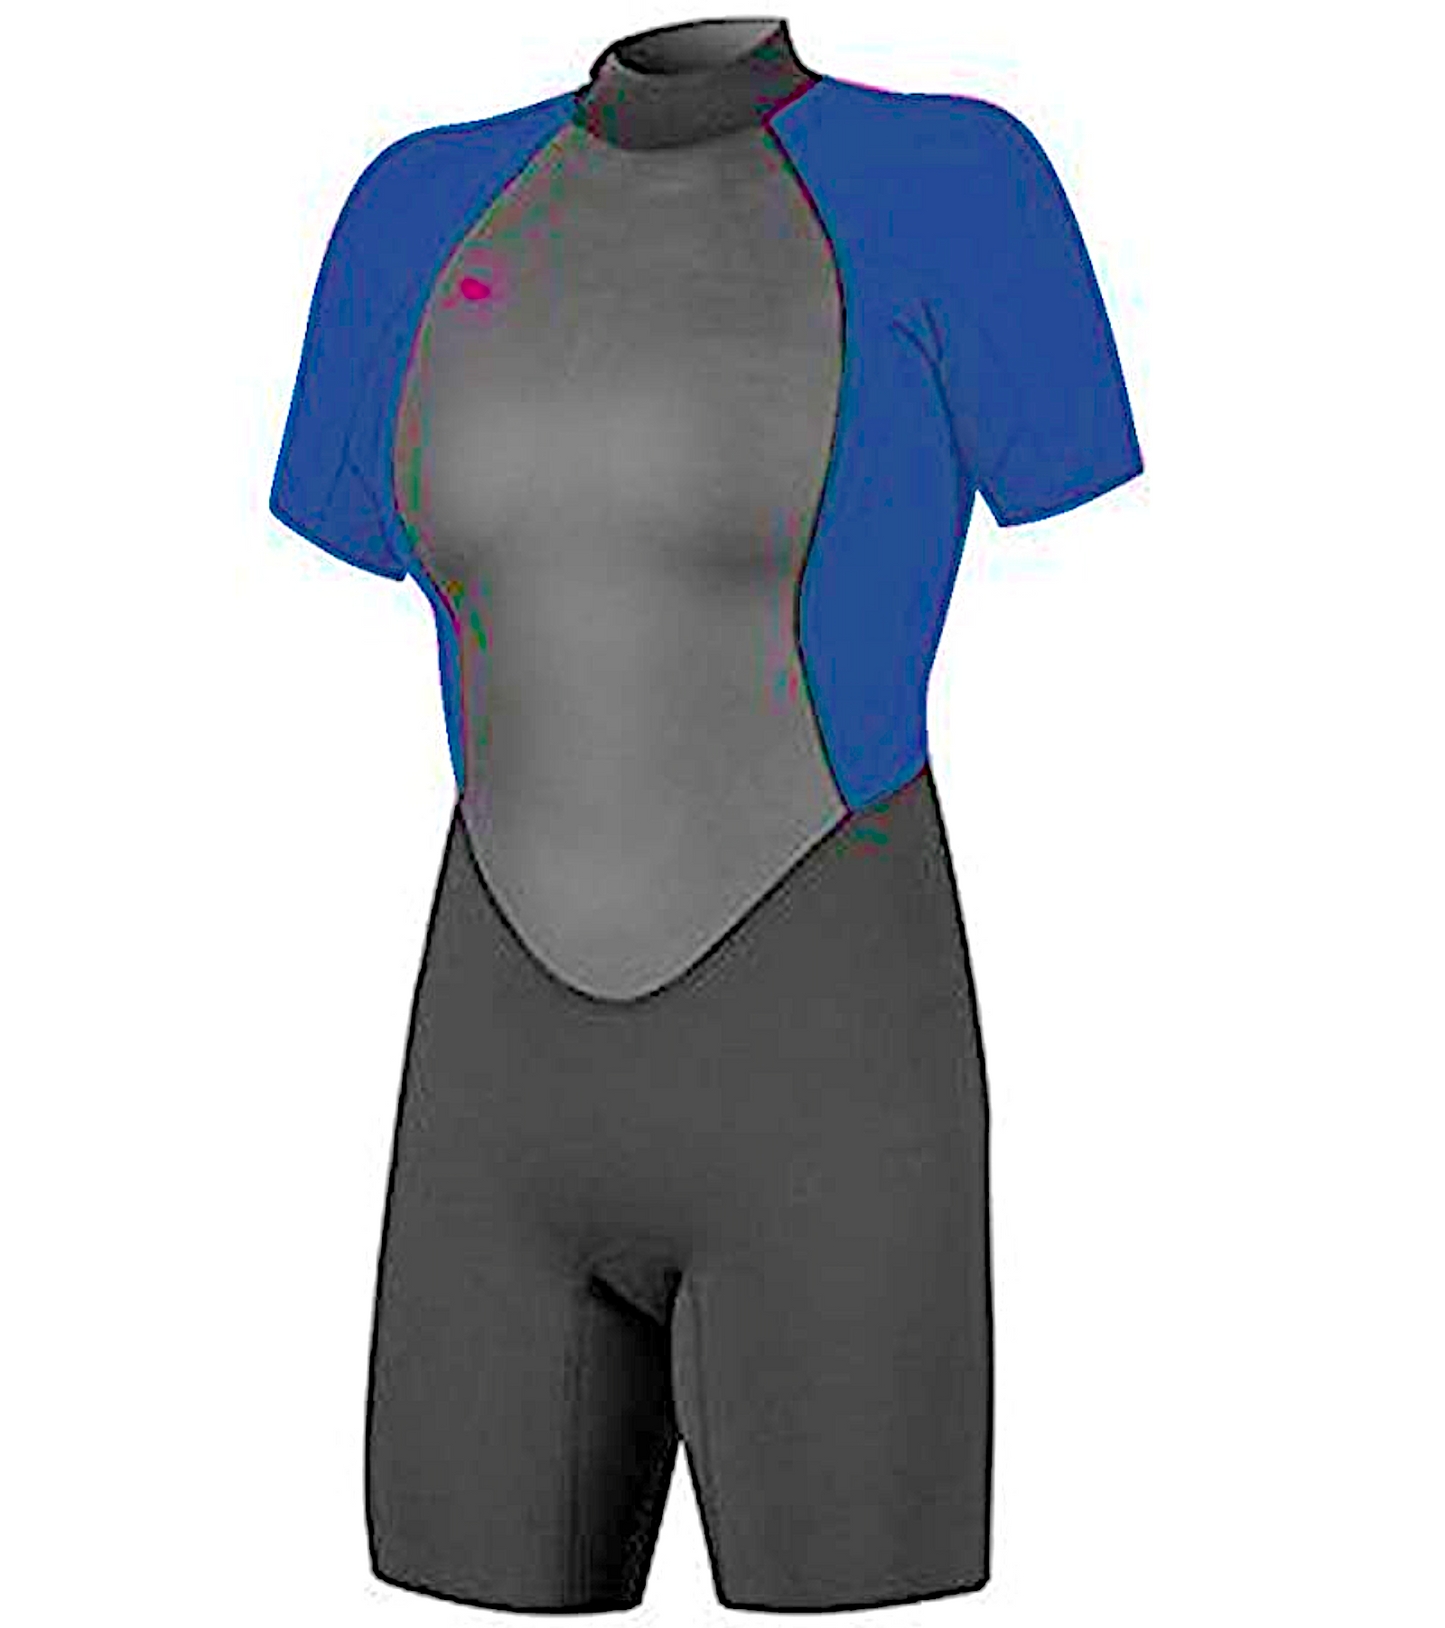 O'NEILL SHORT SLEEVE WETSUIT: 2.0mm for ultra-flexibility and stretch